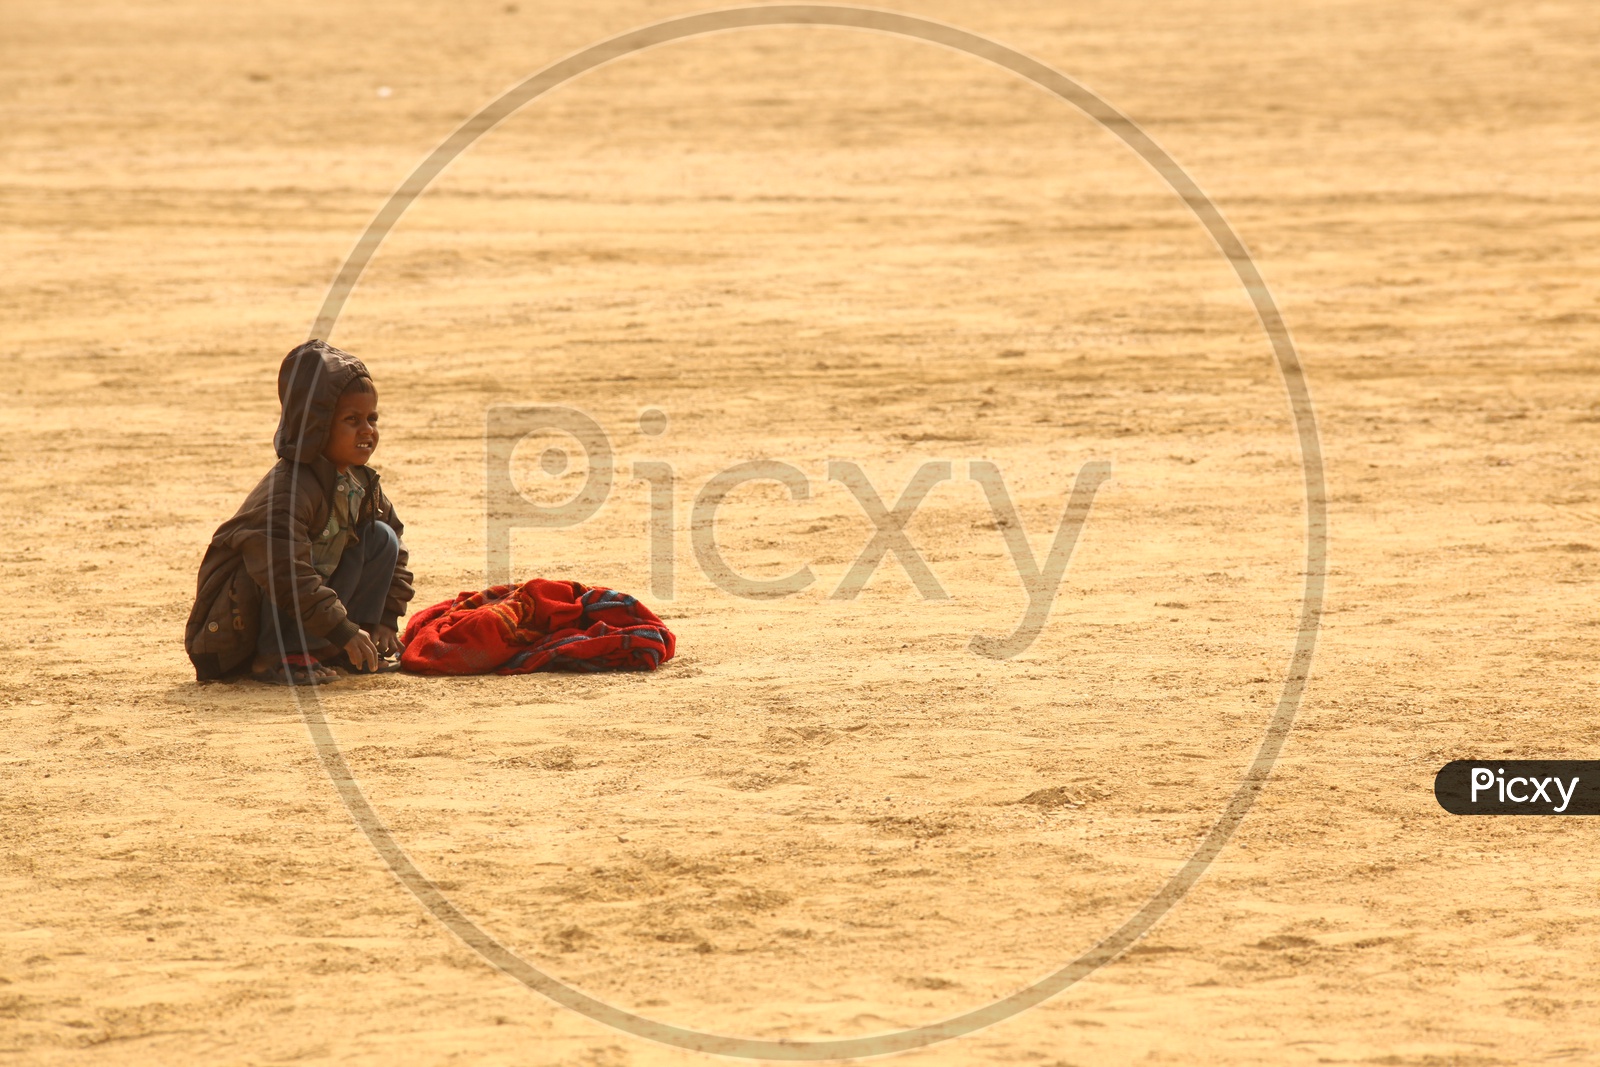 A child with a bag in the desert